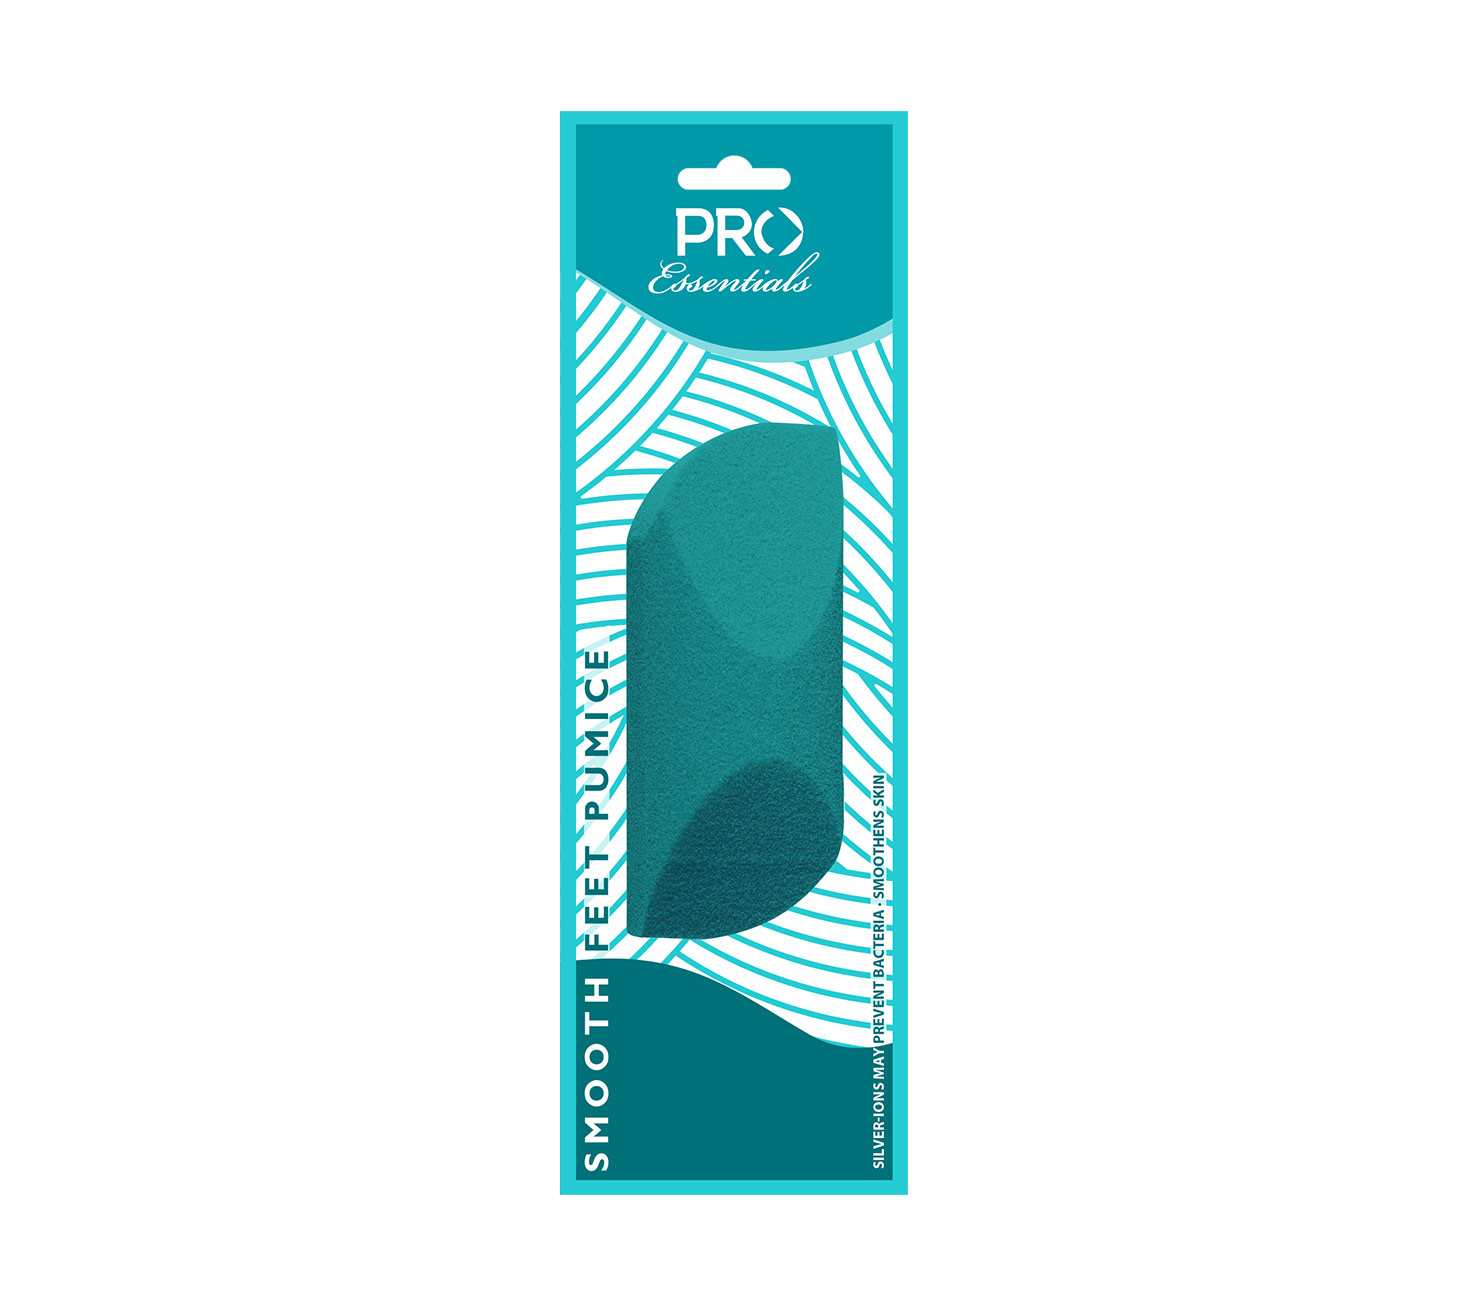 PRO Essentials Smooth Feet Pumice, Best Foot Brush and Pumice Stone